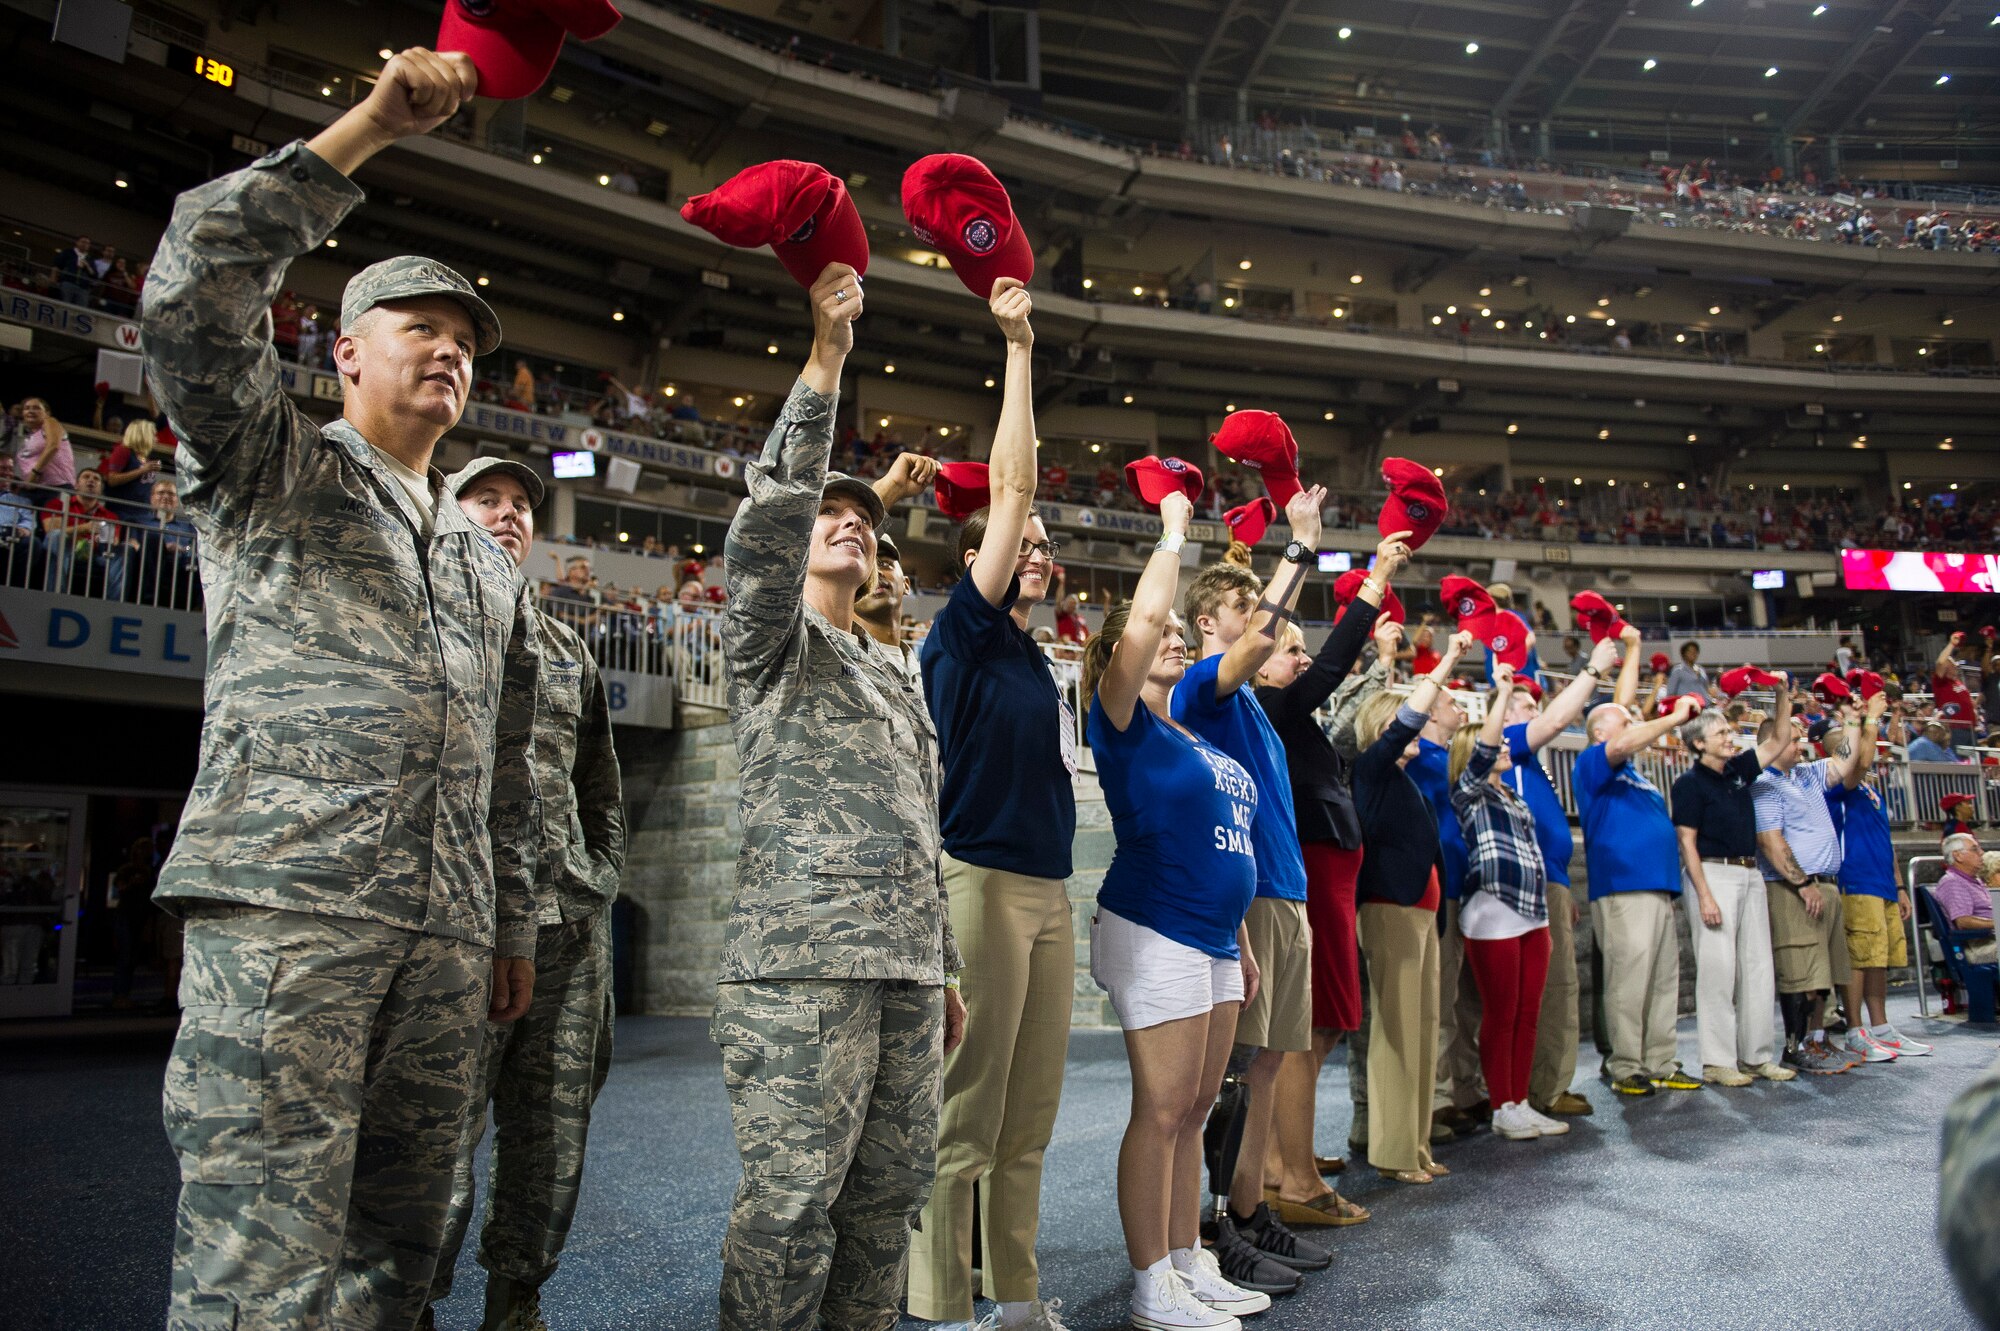 A group of Airmen and their families wave red hats to a crowd at the baseball game.